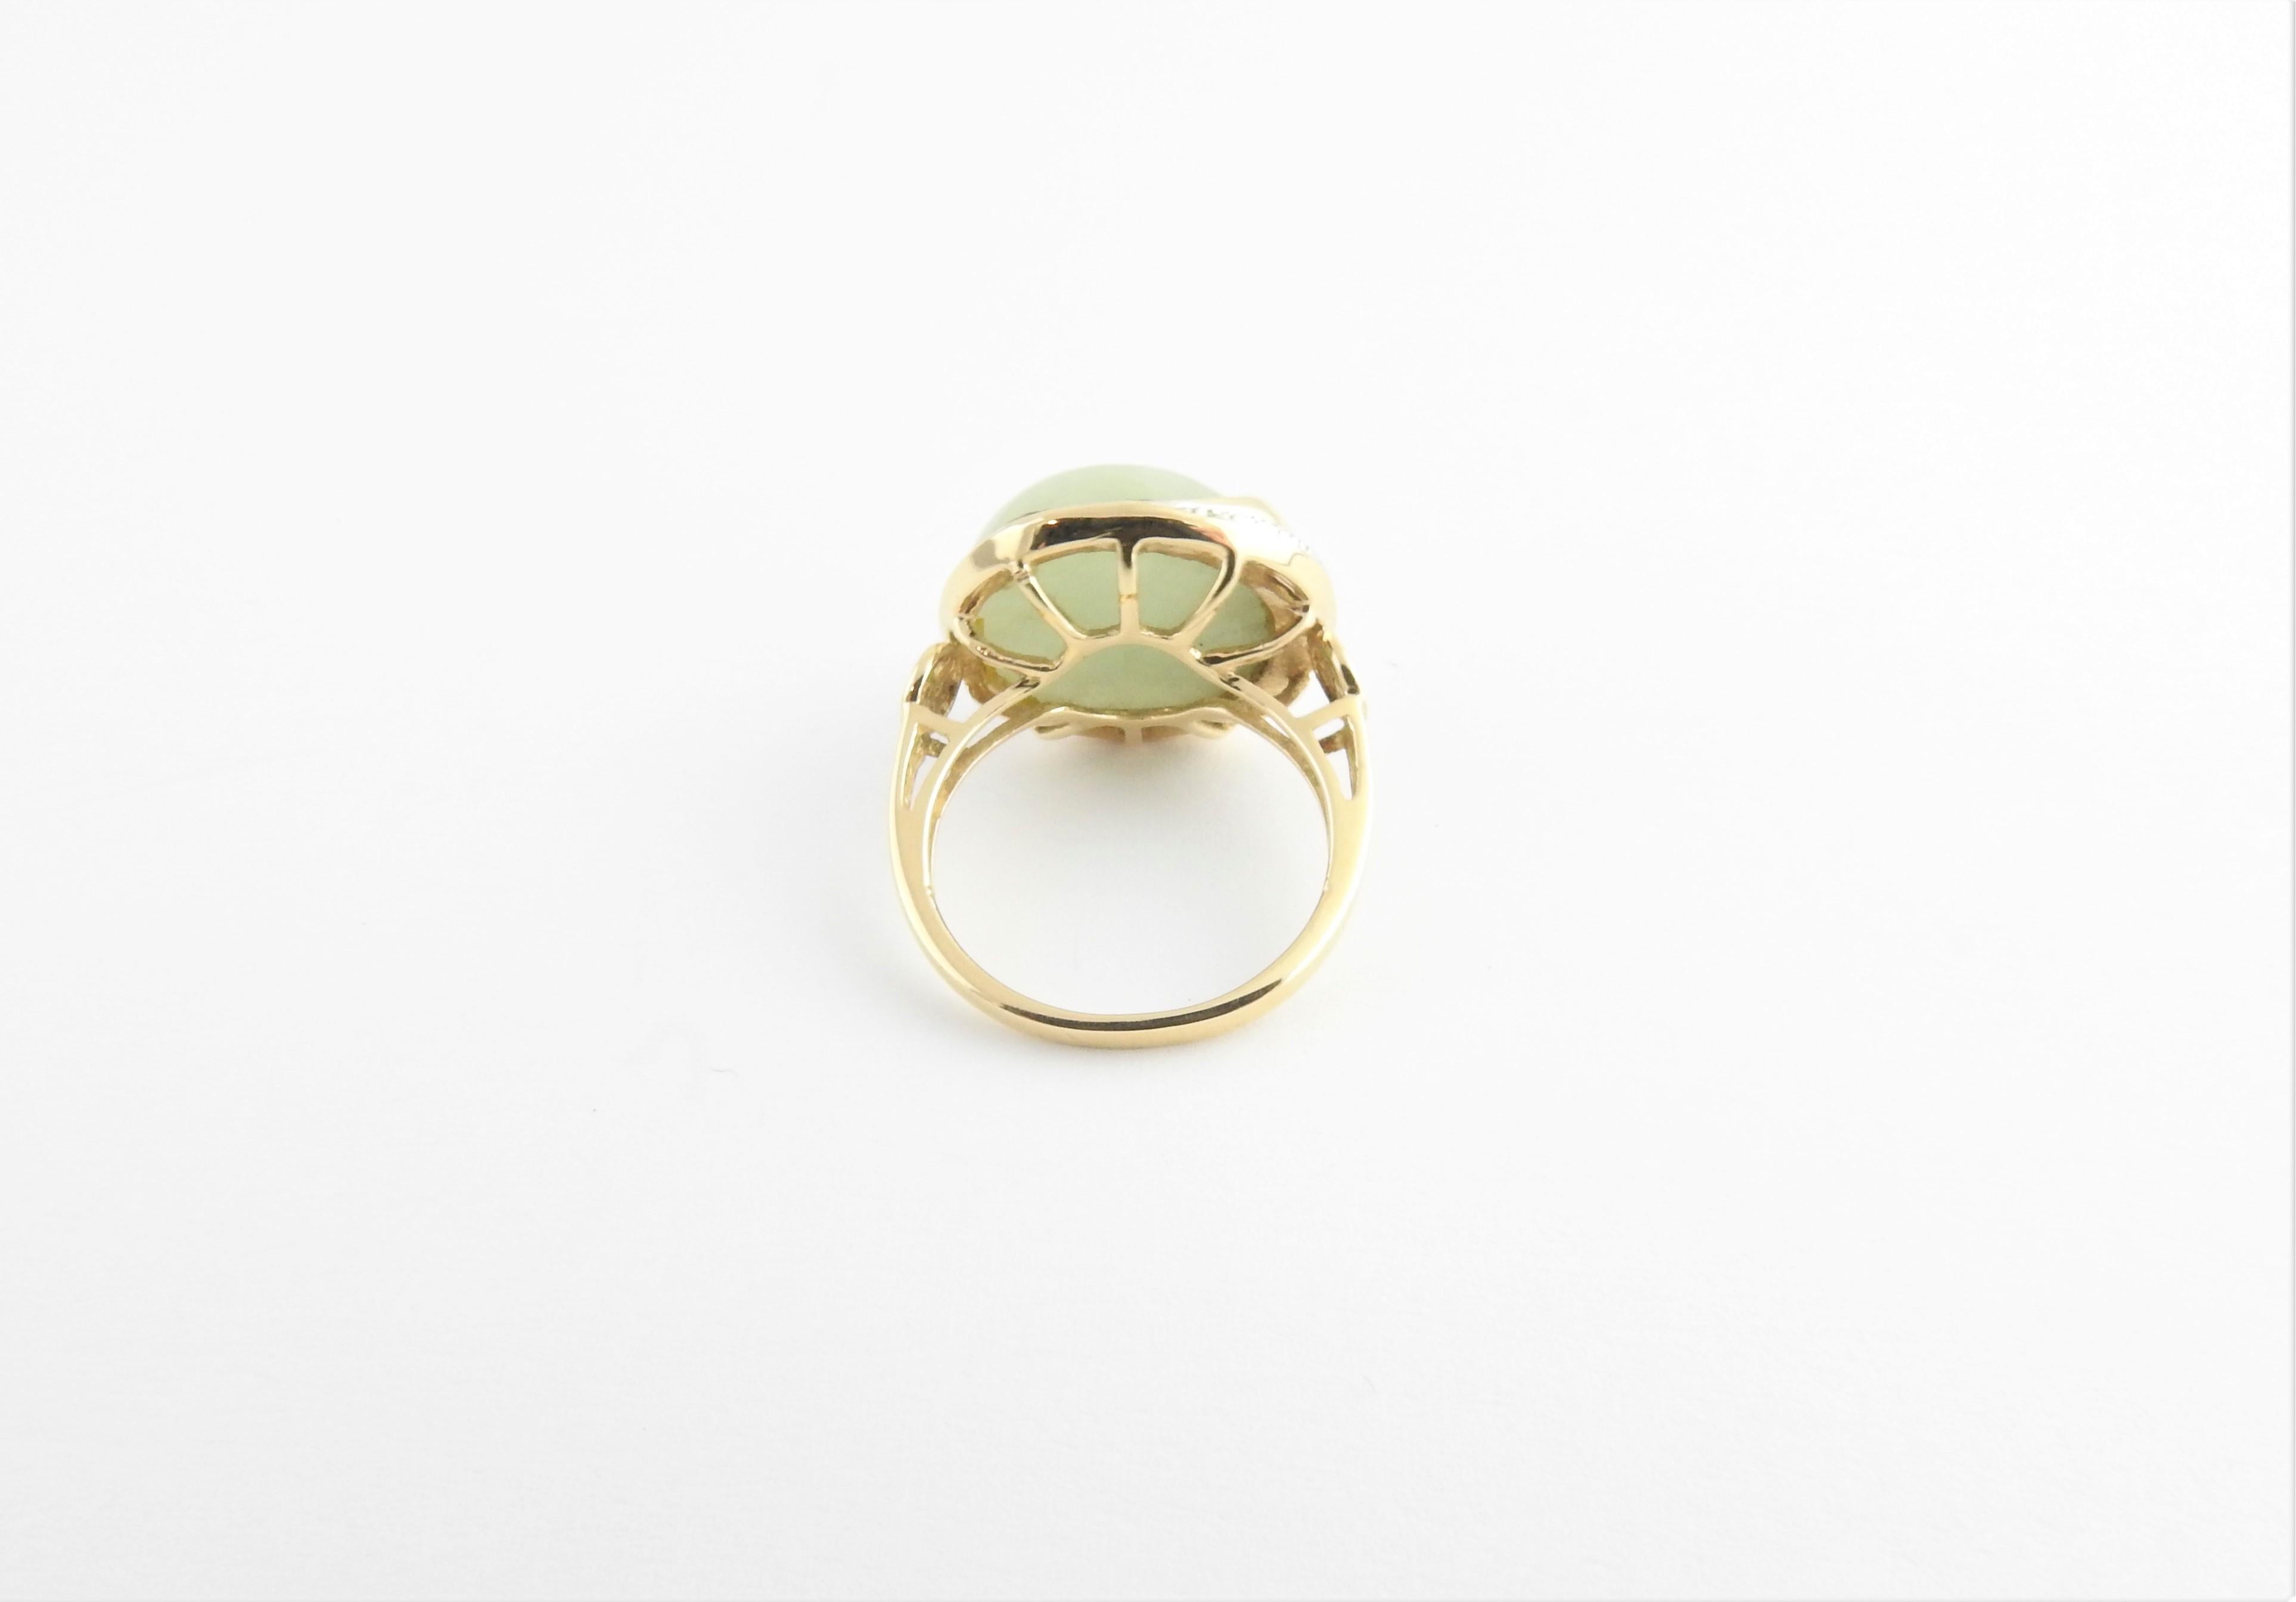 Vintage 14 Karat Yellow Gold and Jade Man in the Moon Ring Size 6

This lovely ring man in the moon ring features on round jade stone (15 mm) set in beautifully detailed 14K yellow gold. Accented with one round single cut diamond.

Shank: 2